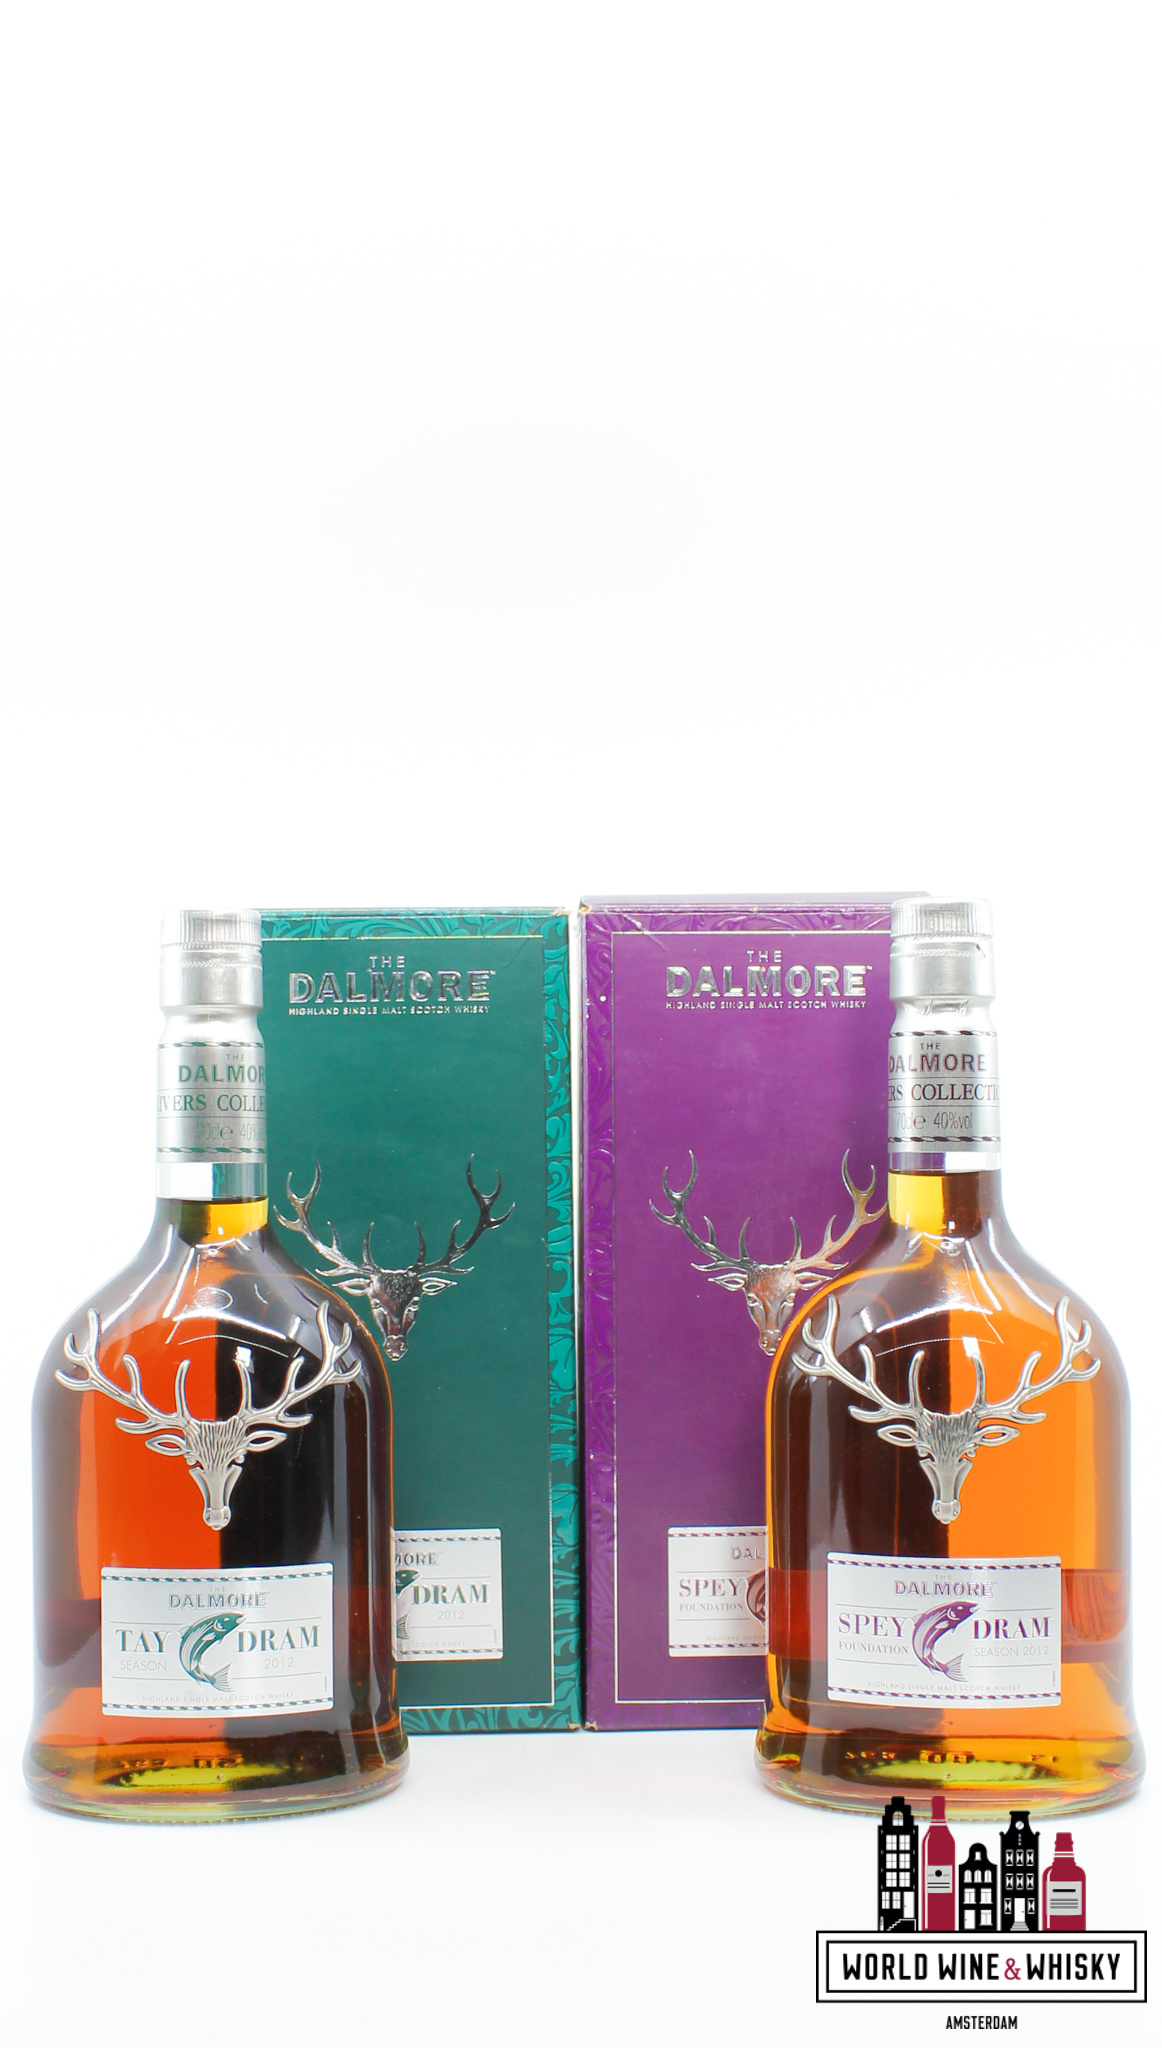 Dalmore Dalmore 2012 - Rivers Collection: Tray, Spey, Dee & Tweed Dram 40% (full set)